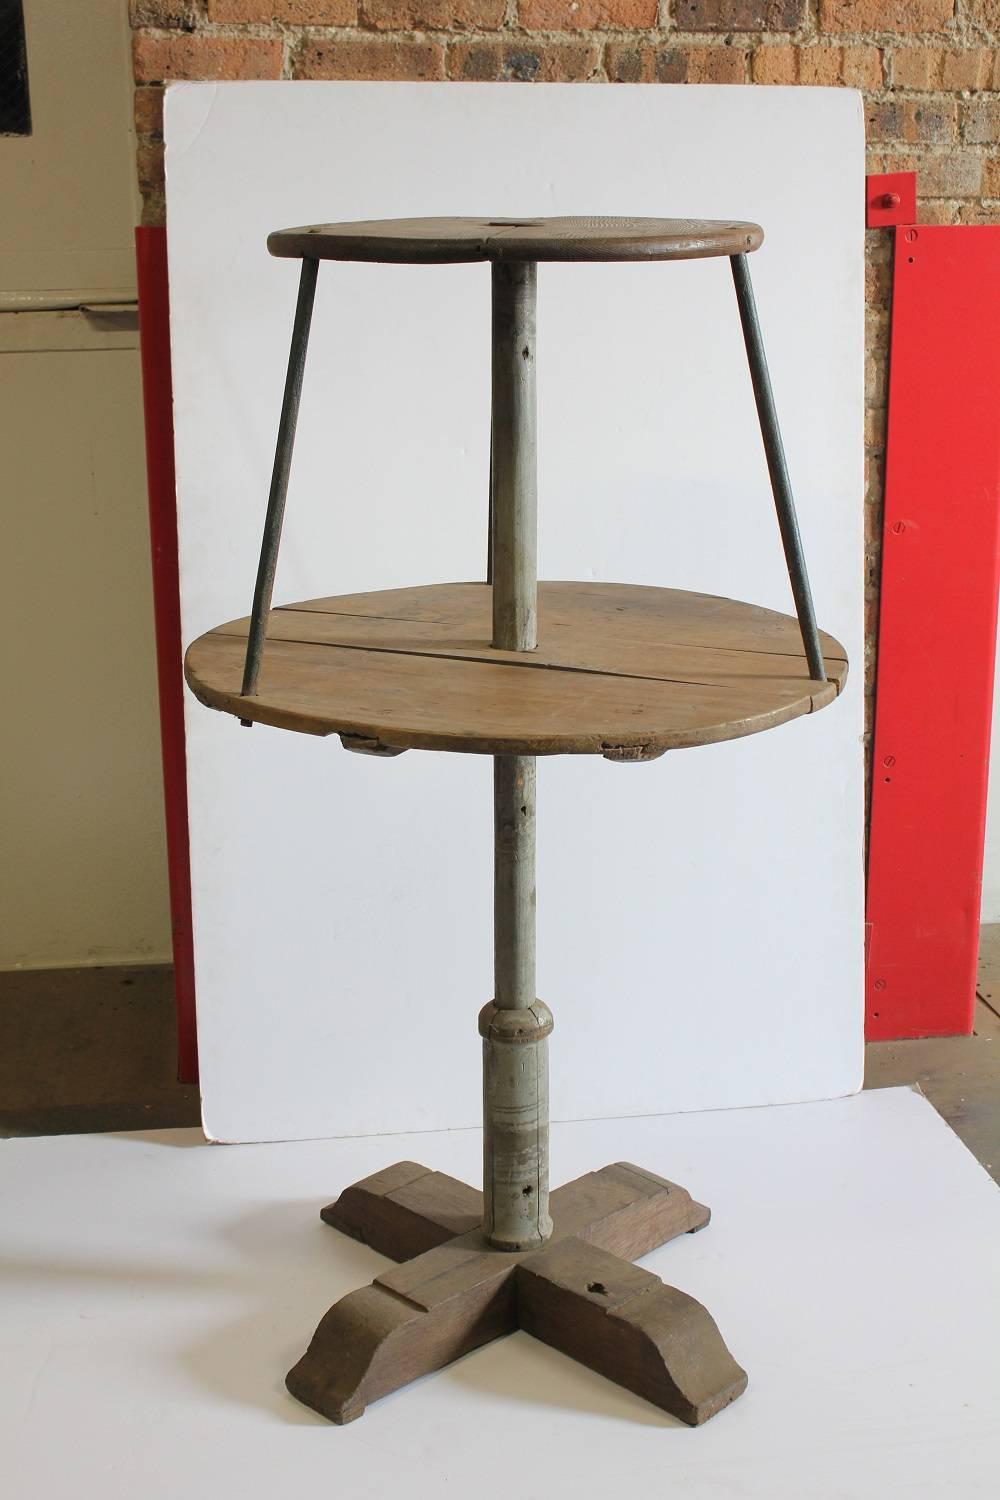 1900s dry goods store two-tier display table.